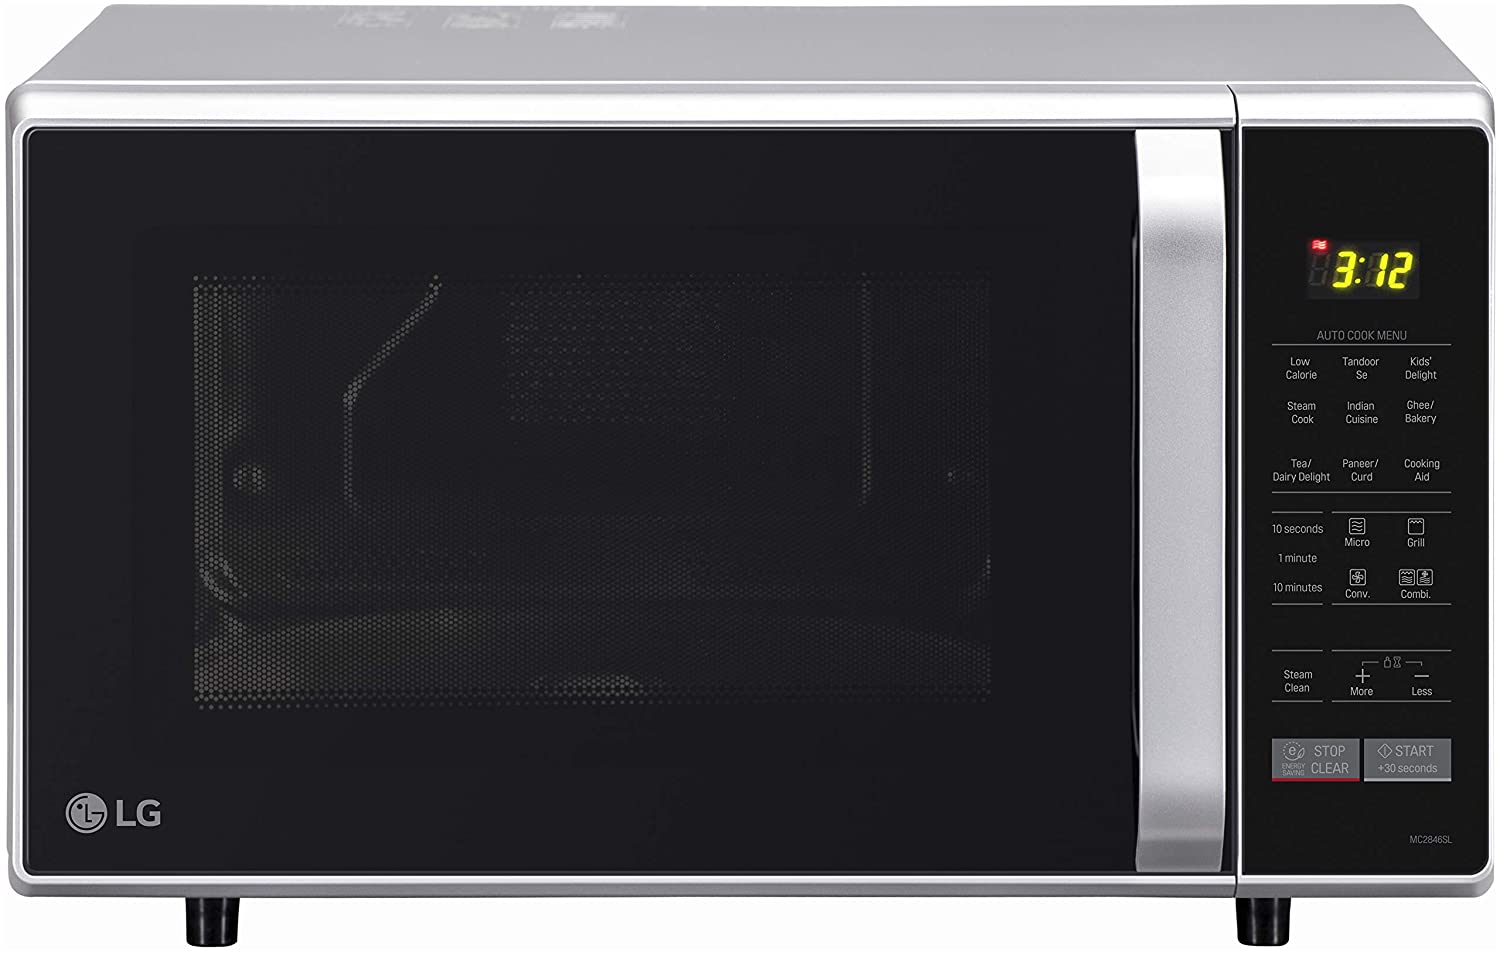 LG 28L Microwave Oven Offers